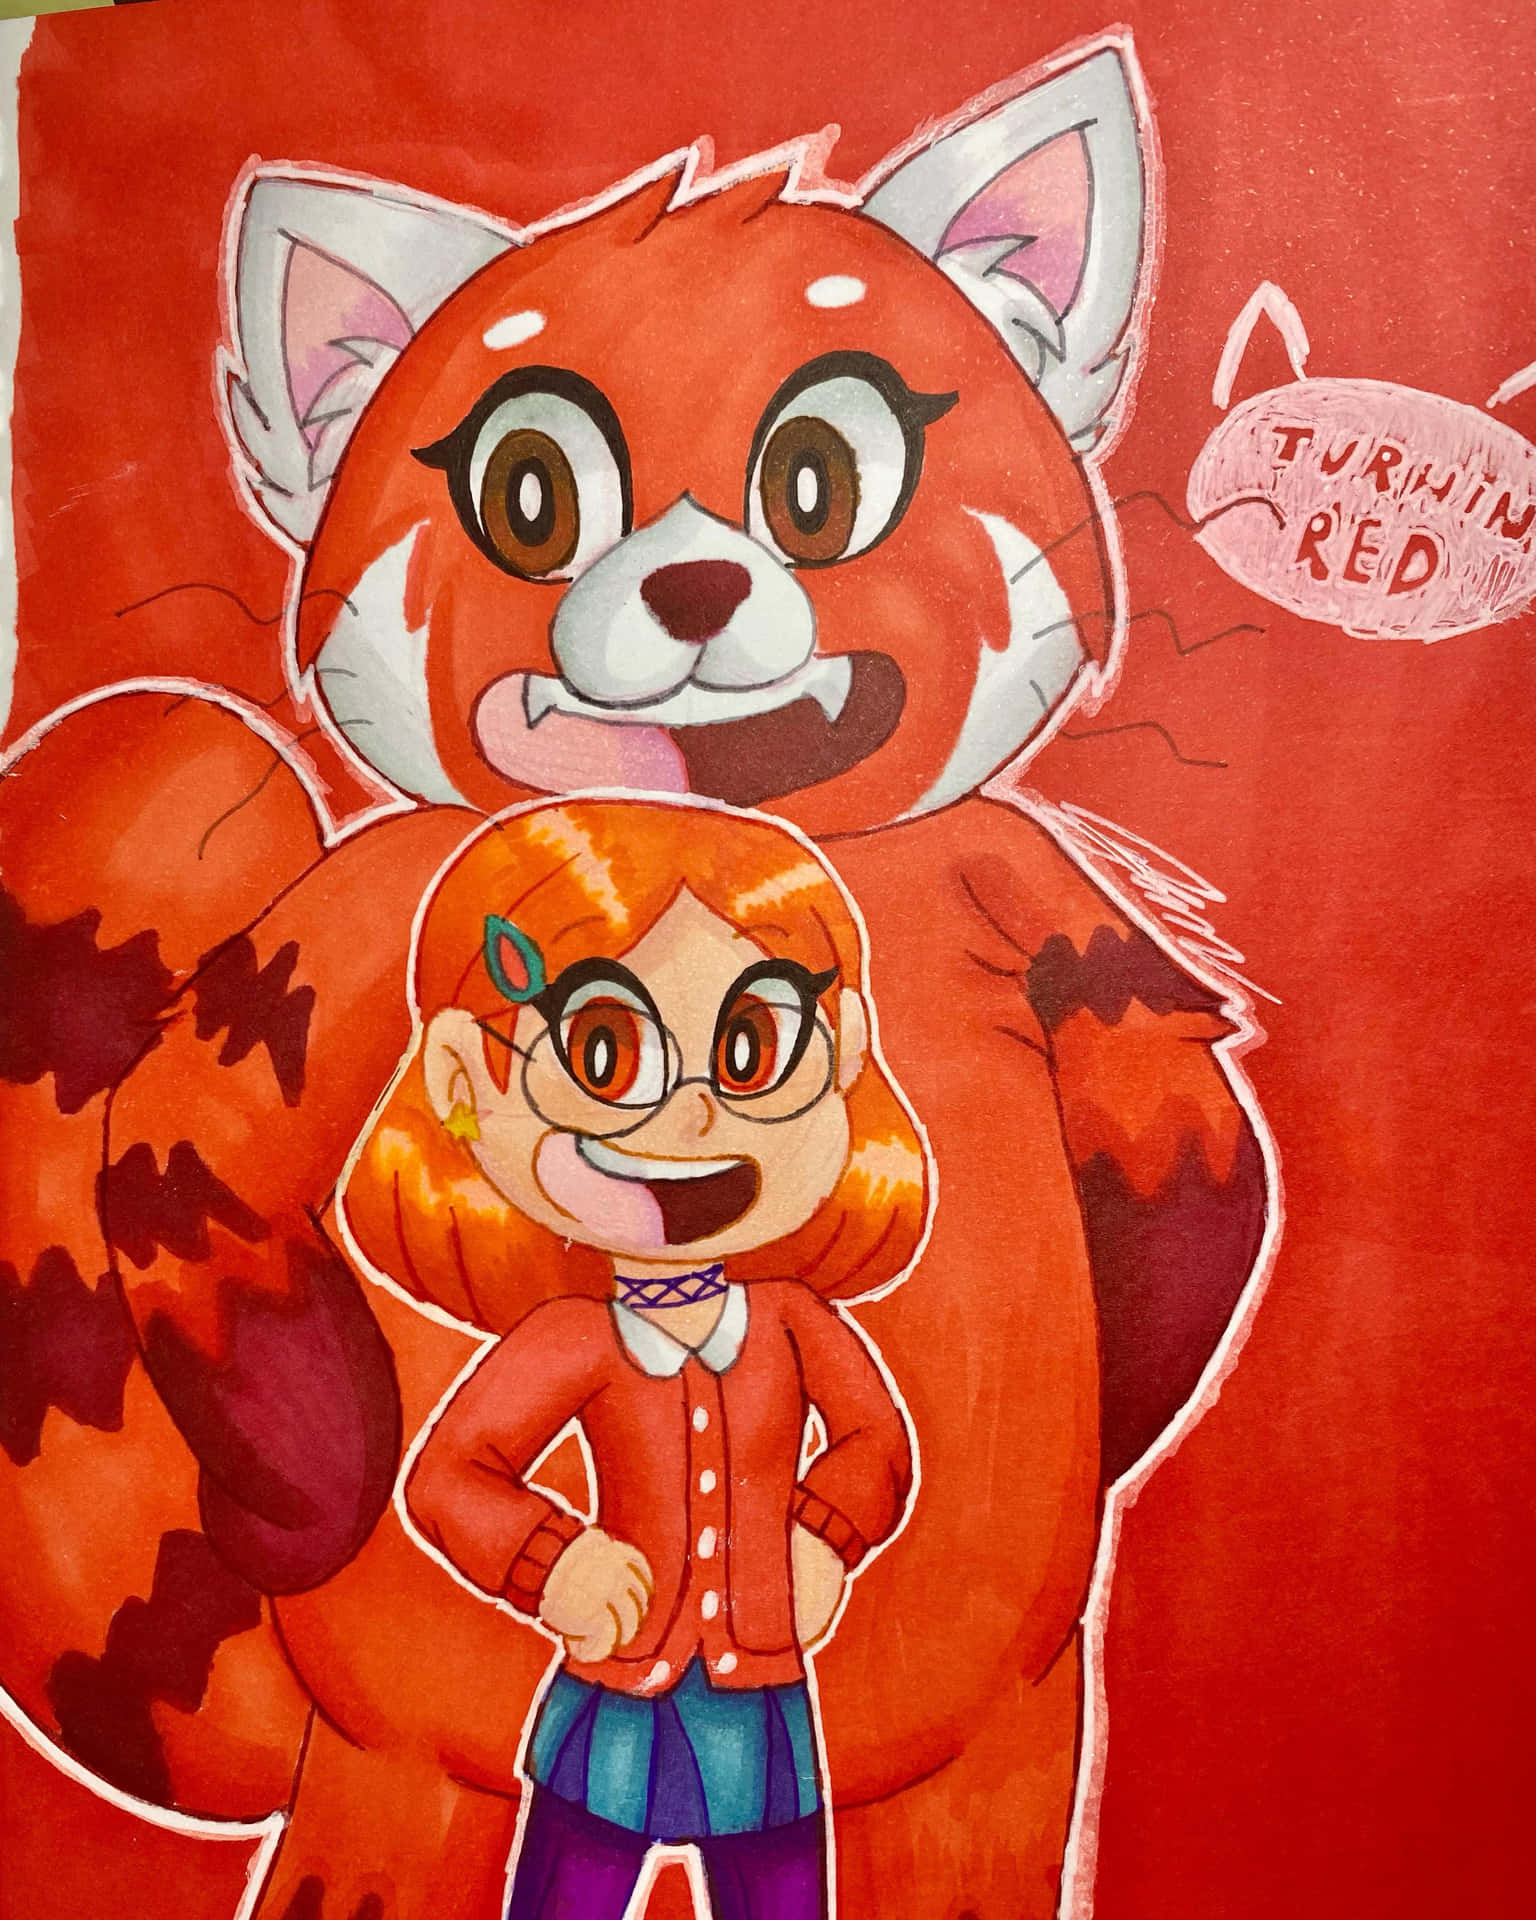 A Drawing Of A Girl And A Red Panda